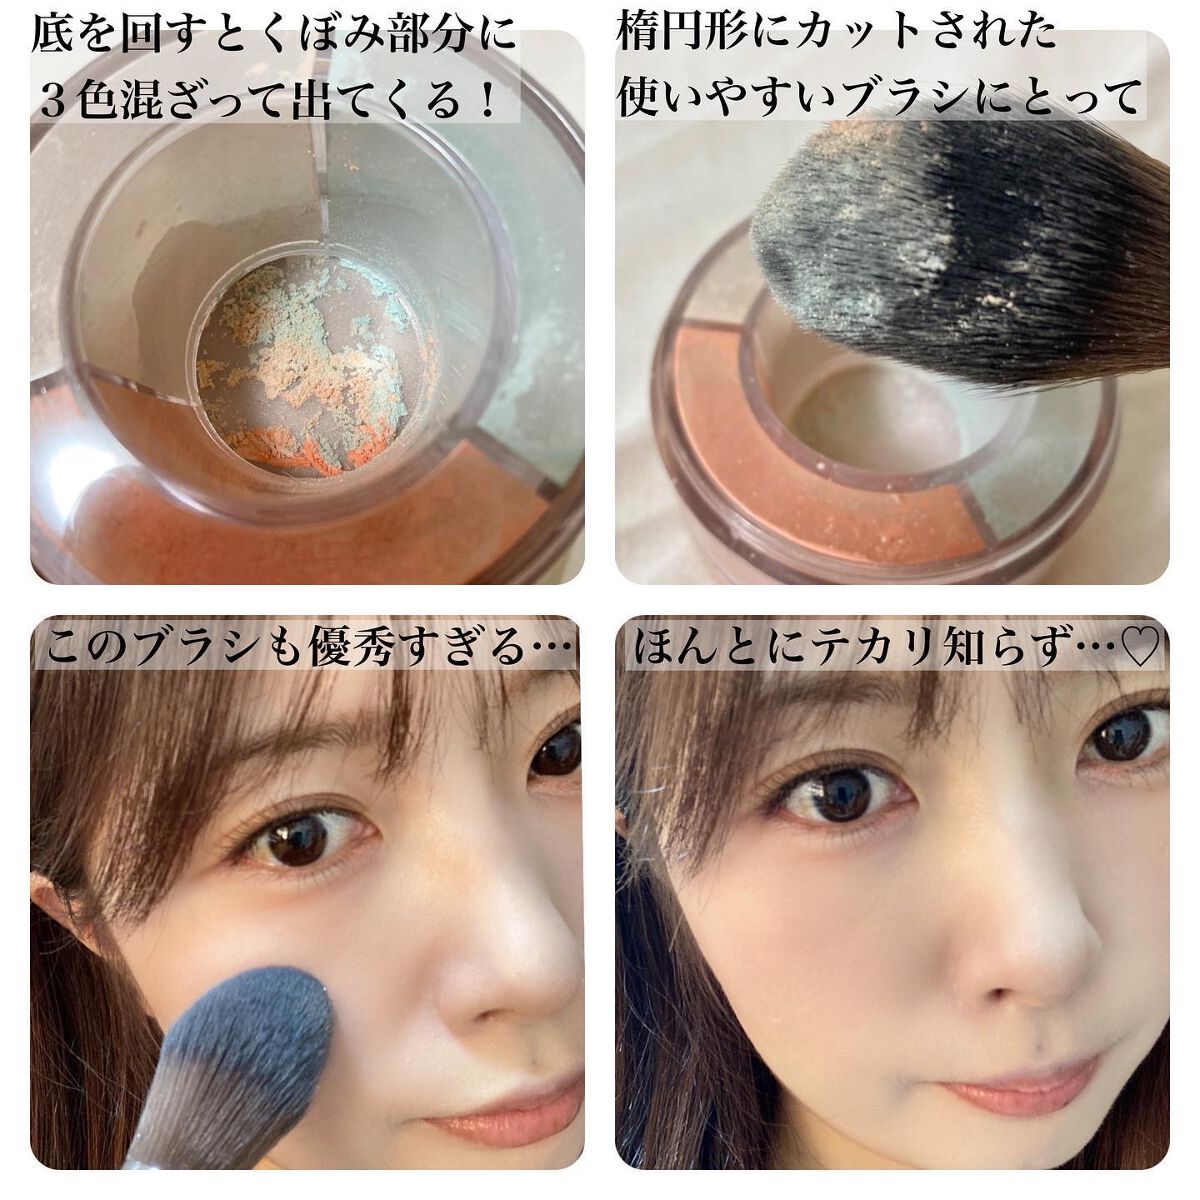 HDスキン ツイストライト｜MAKE UP FOR EVERの口コミ - MAKE UP FOR ...